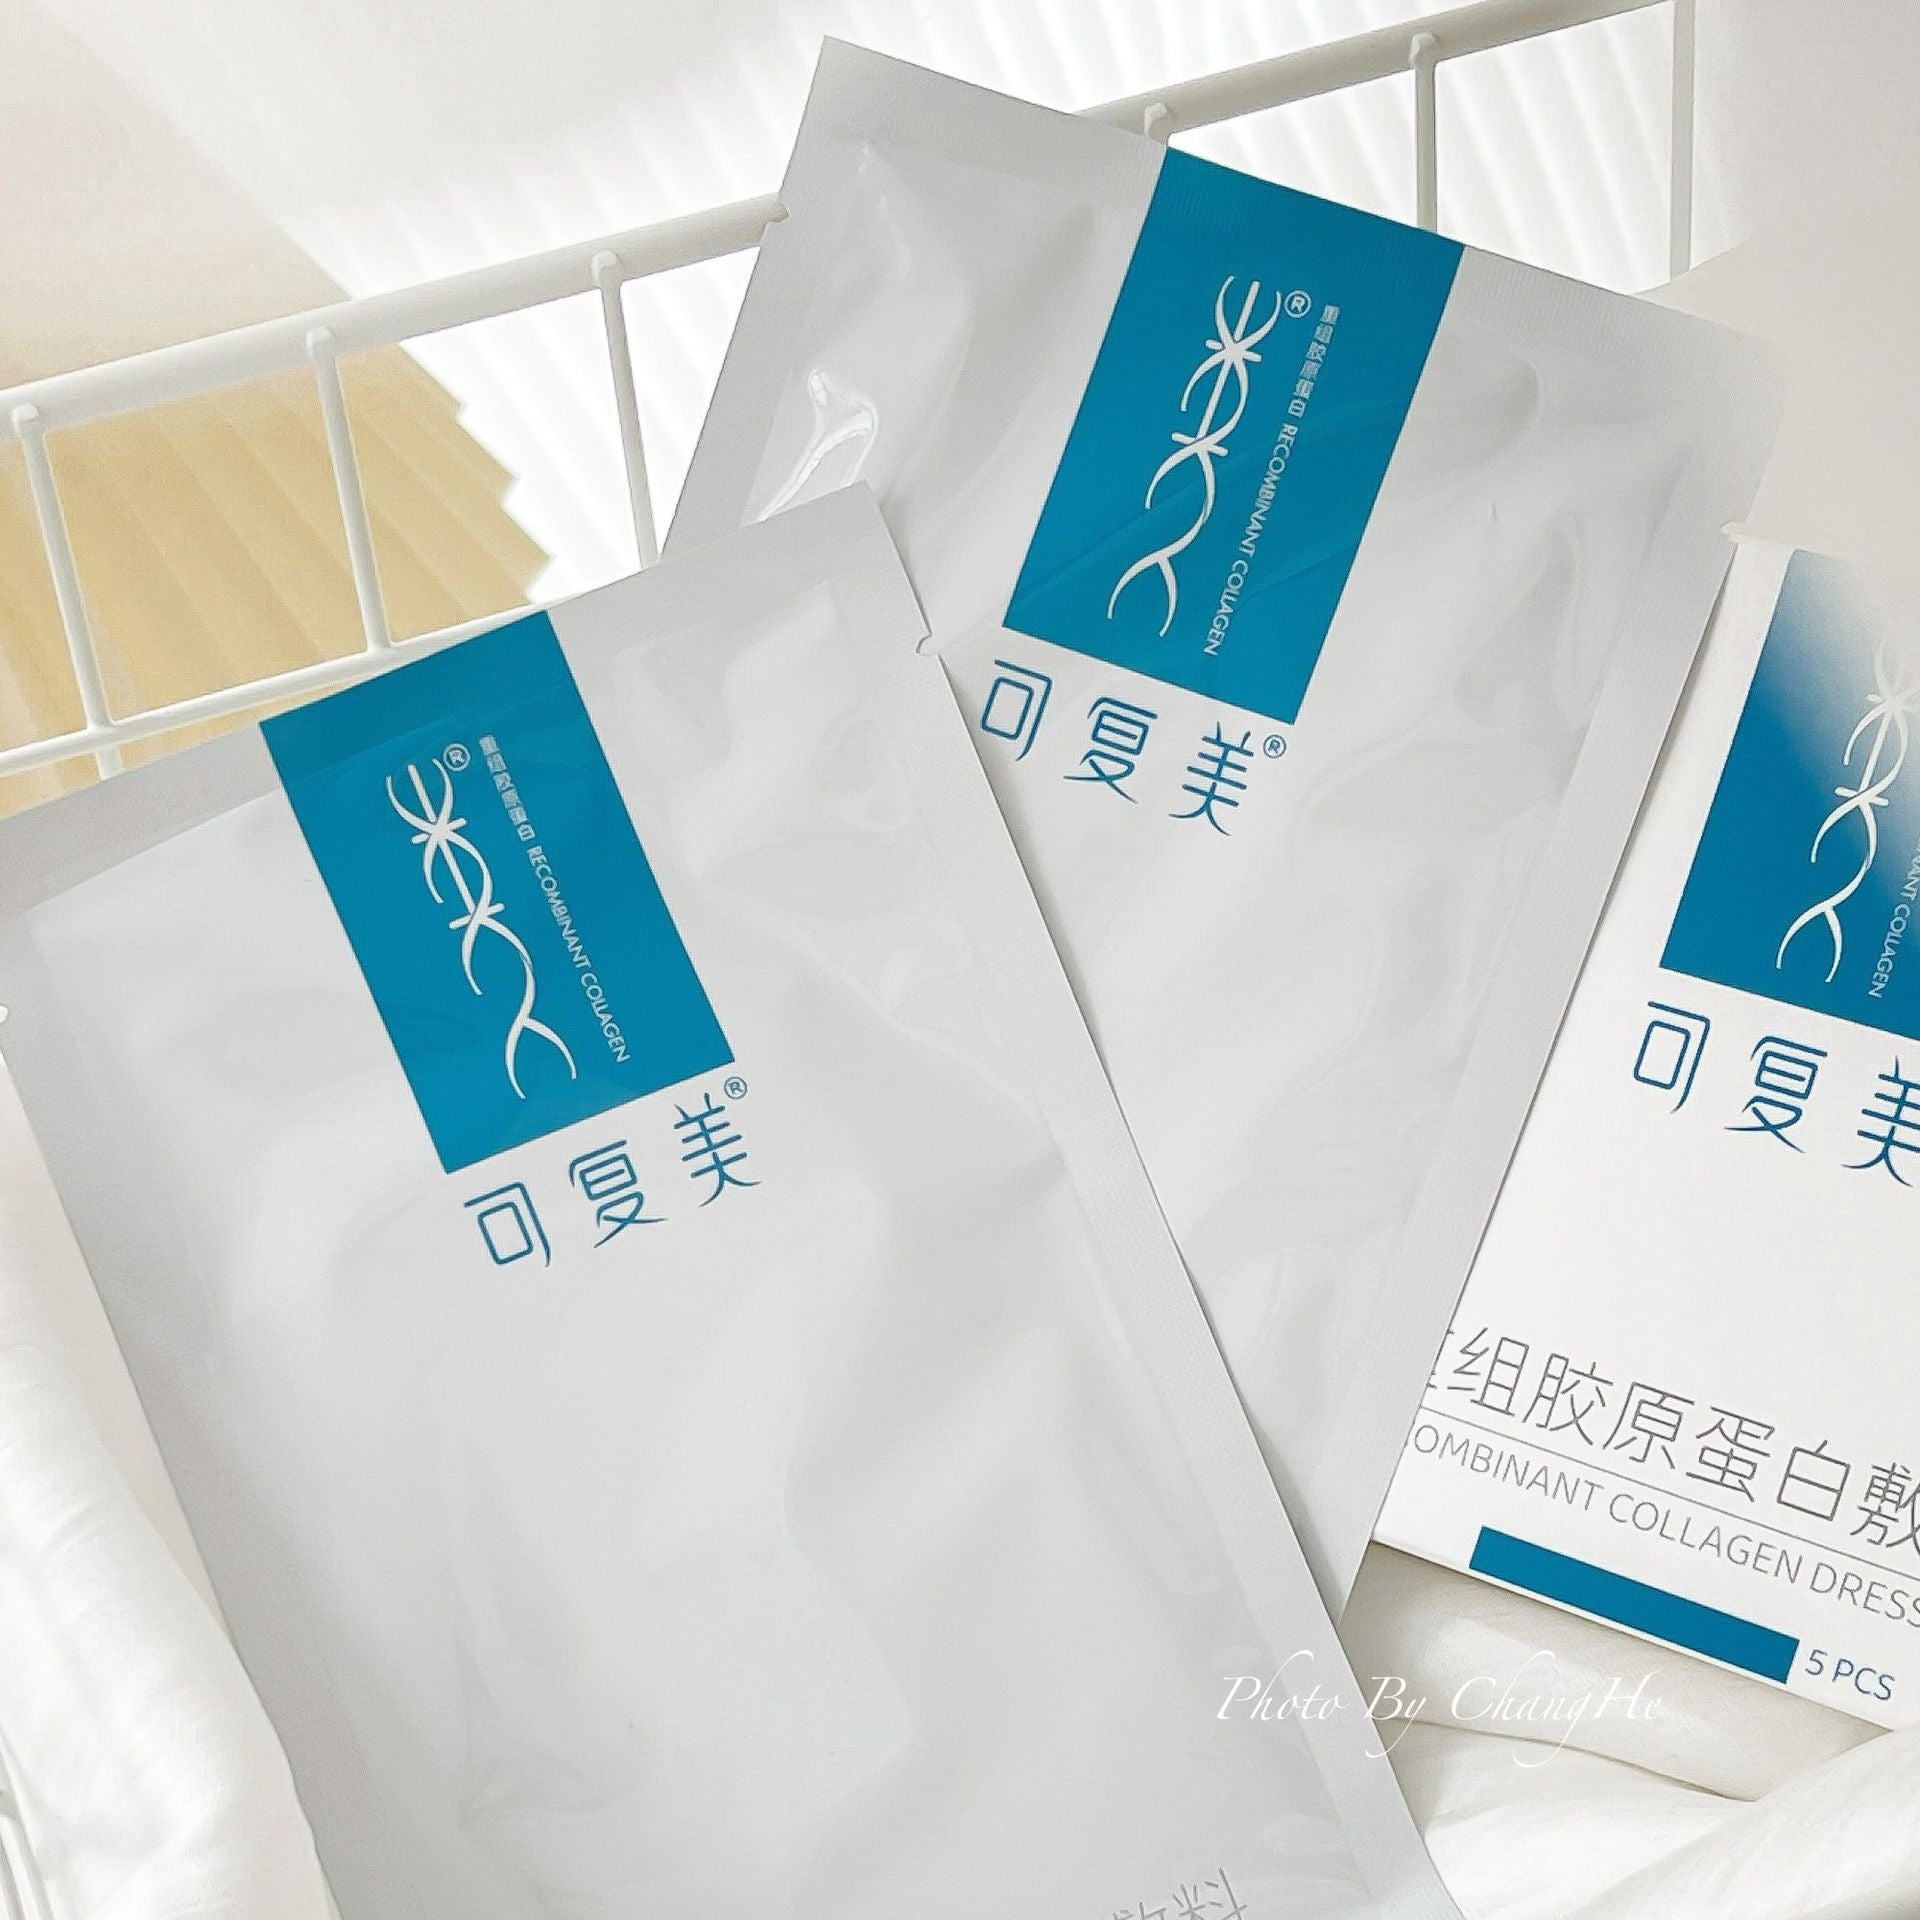 Kefumei-like collagen dressing can be applied cold to repair and relieve sensitive skin mask可复美类人胶原蛋白面膜 5pcs*30ml